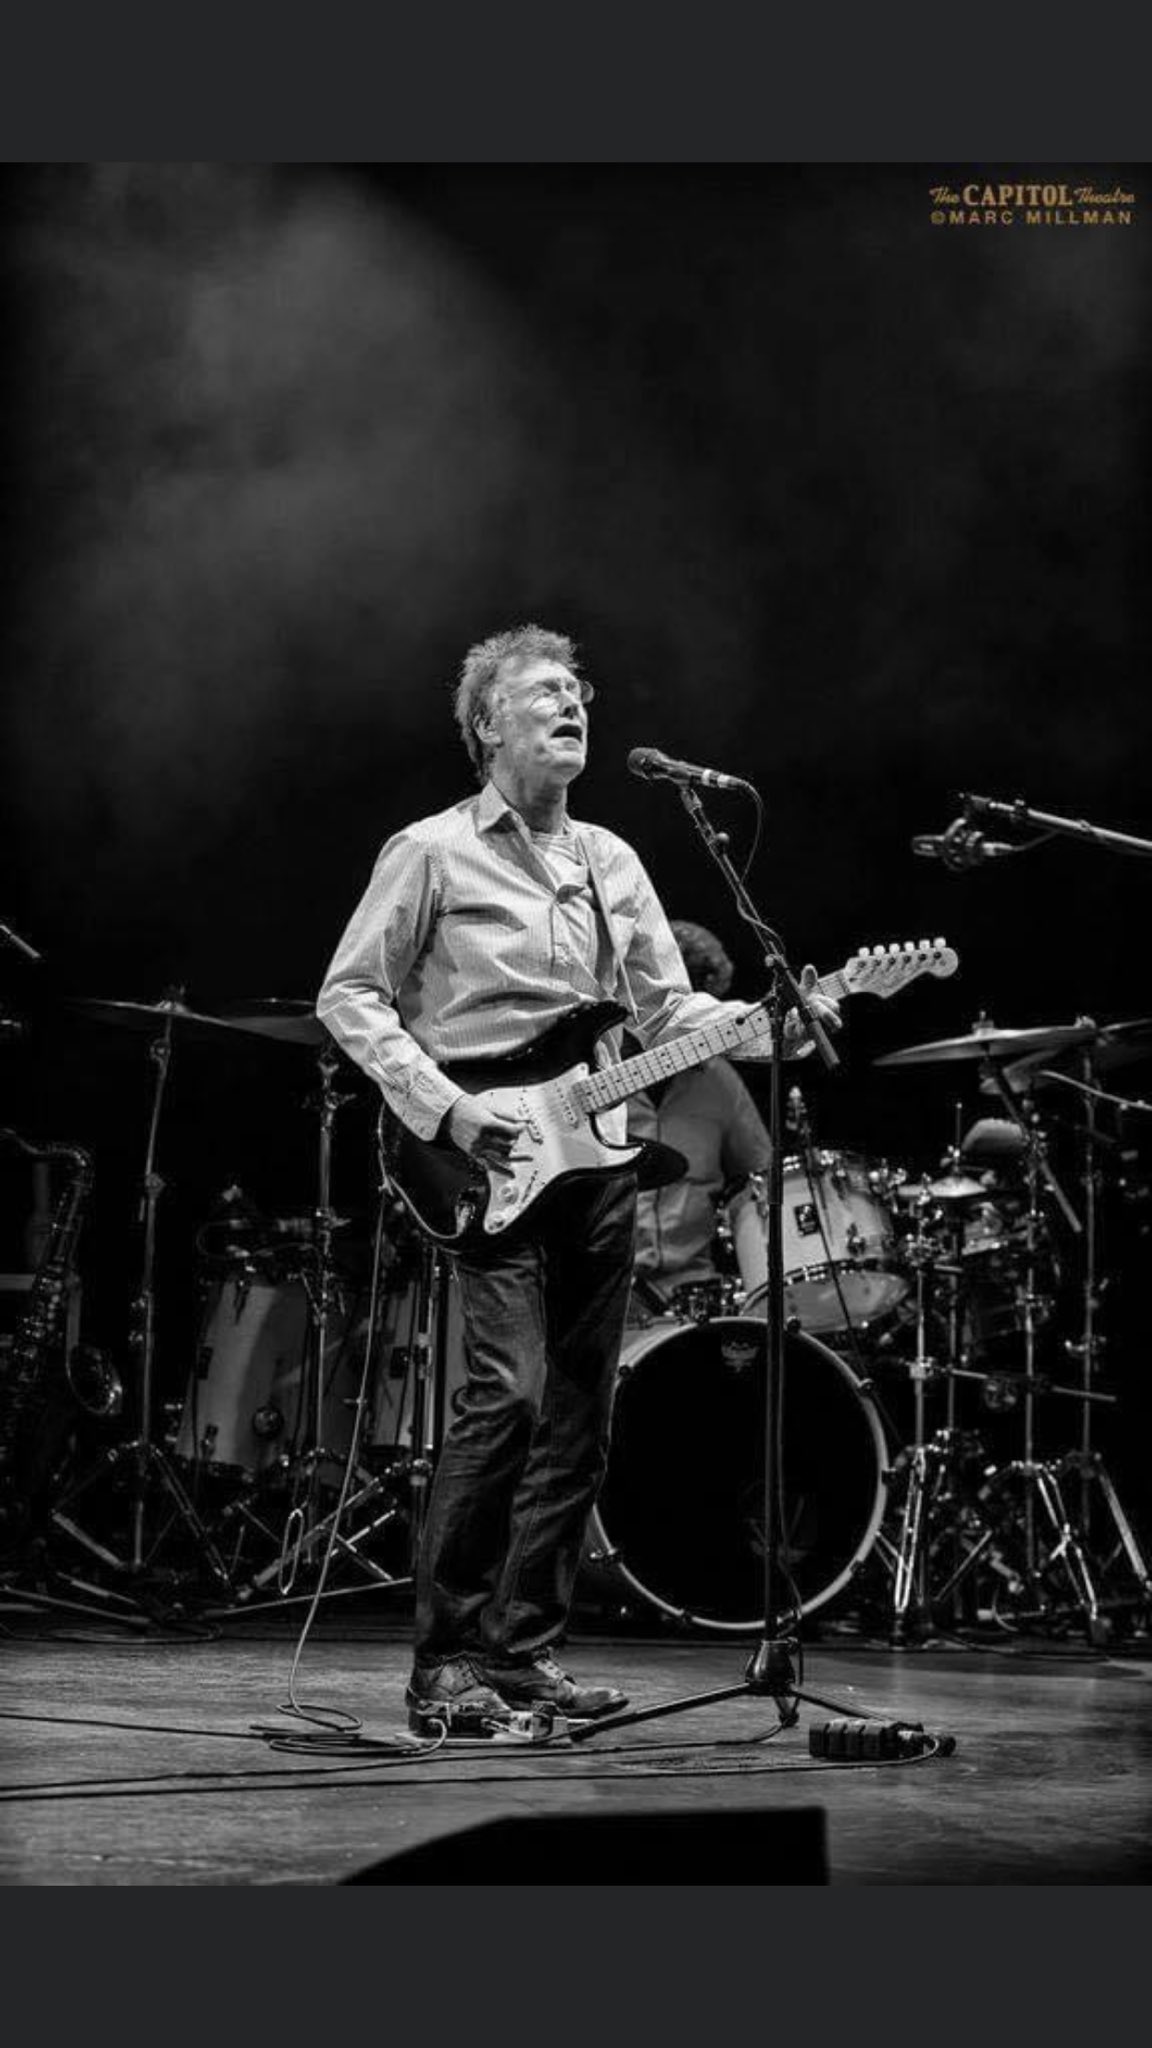 Happy Birthday to the one and only Steve Winwood! 